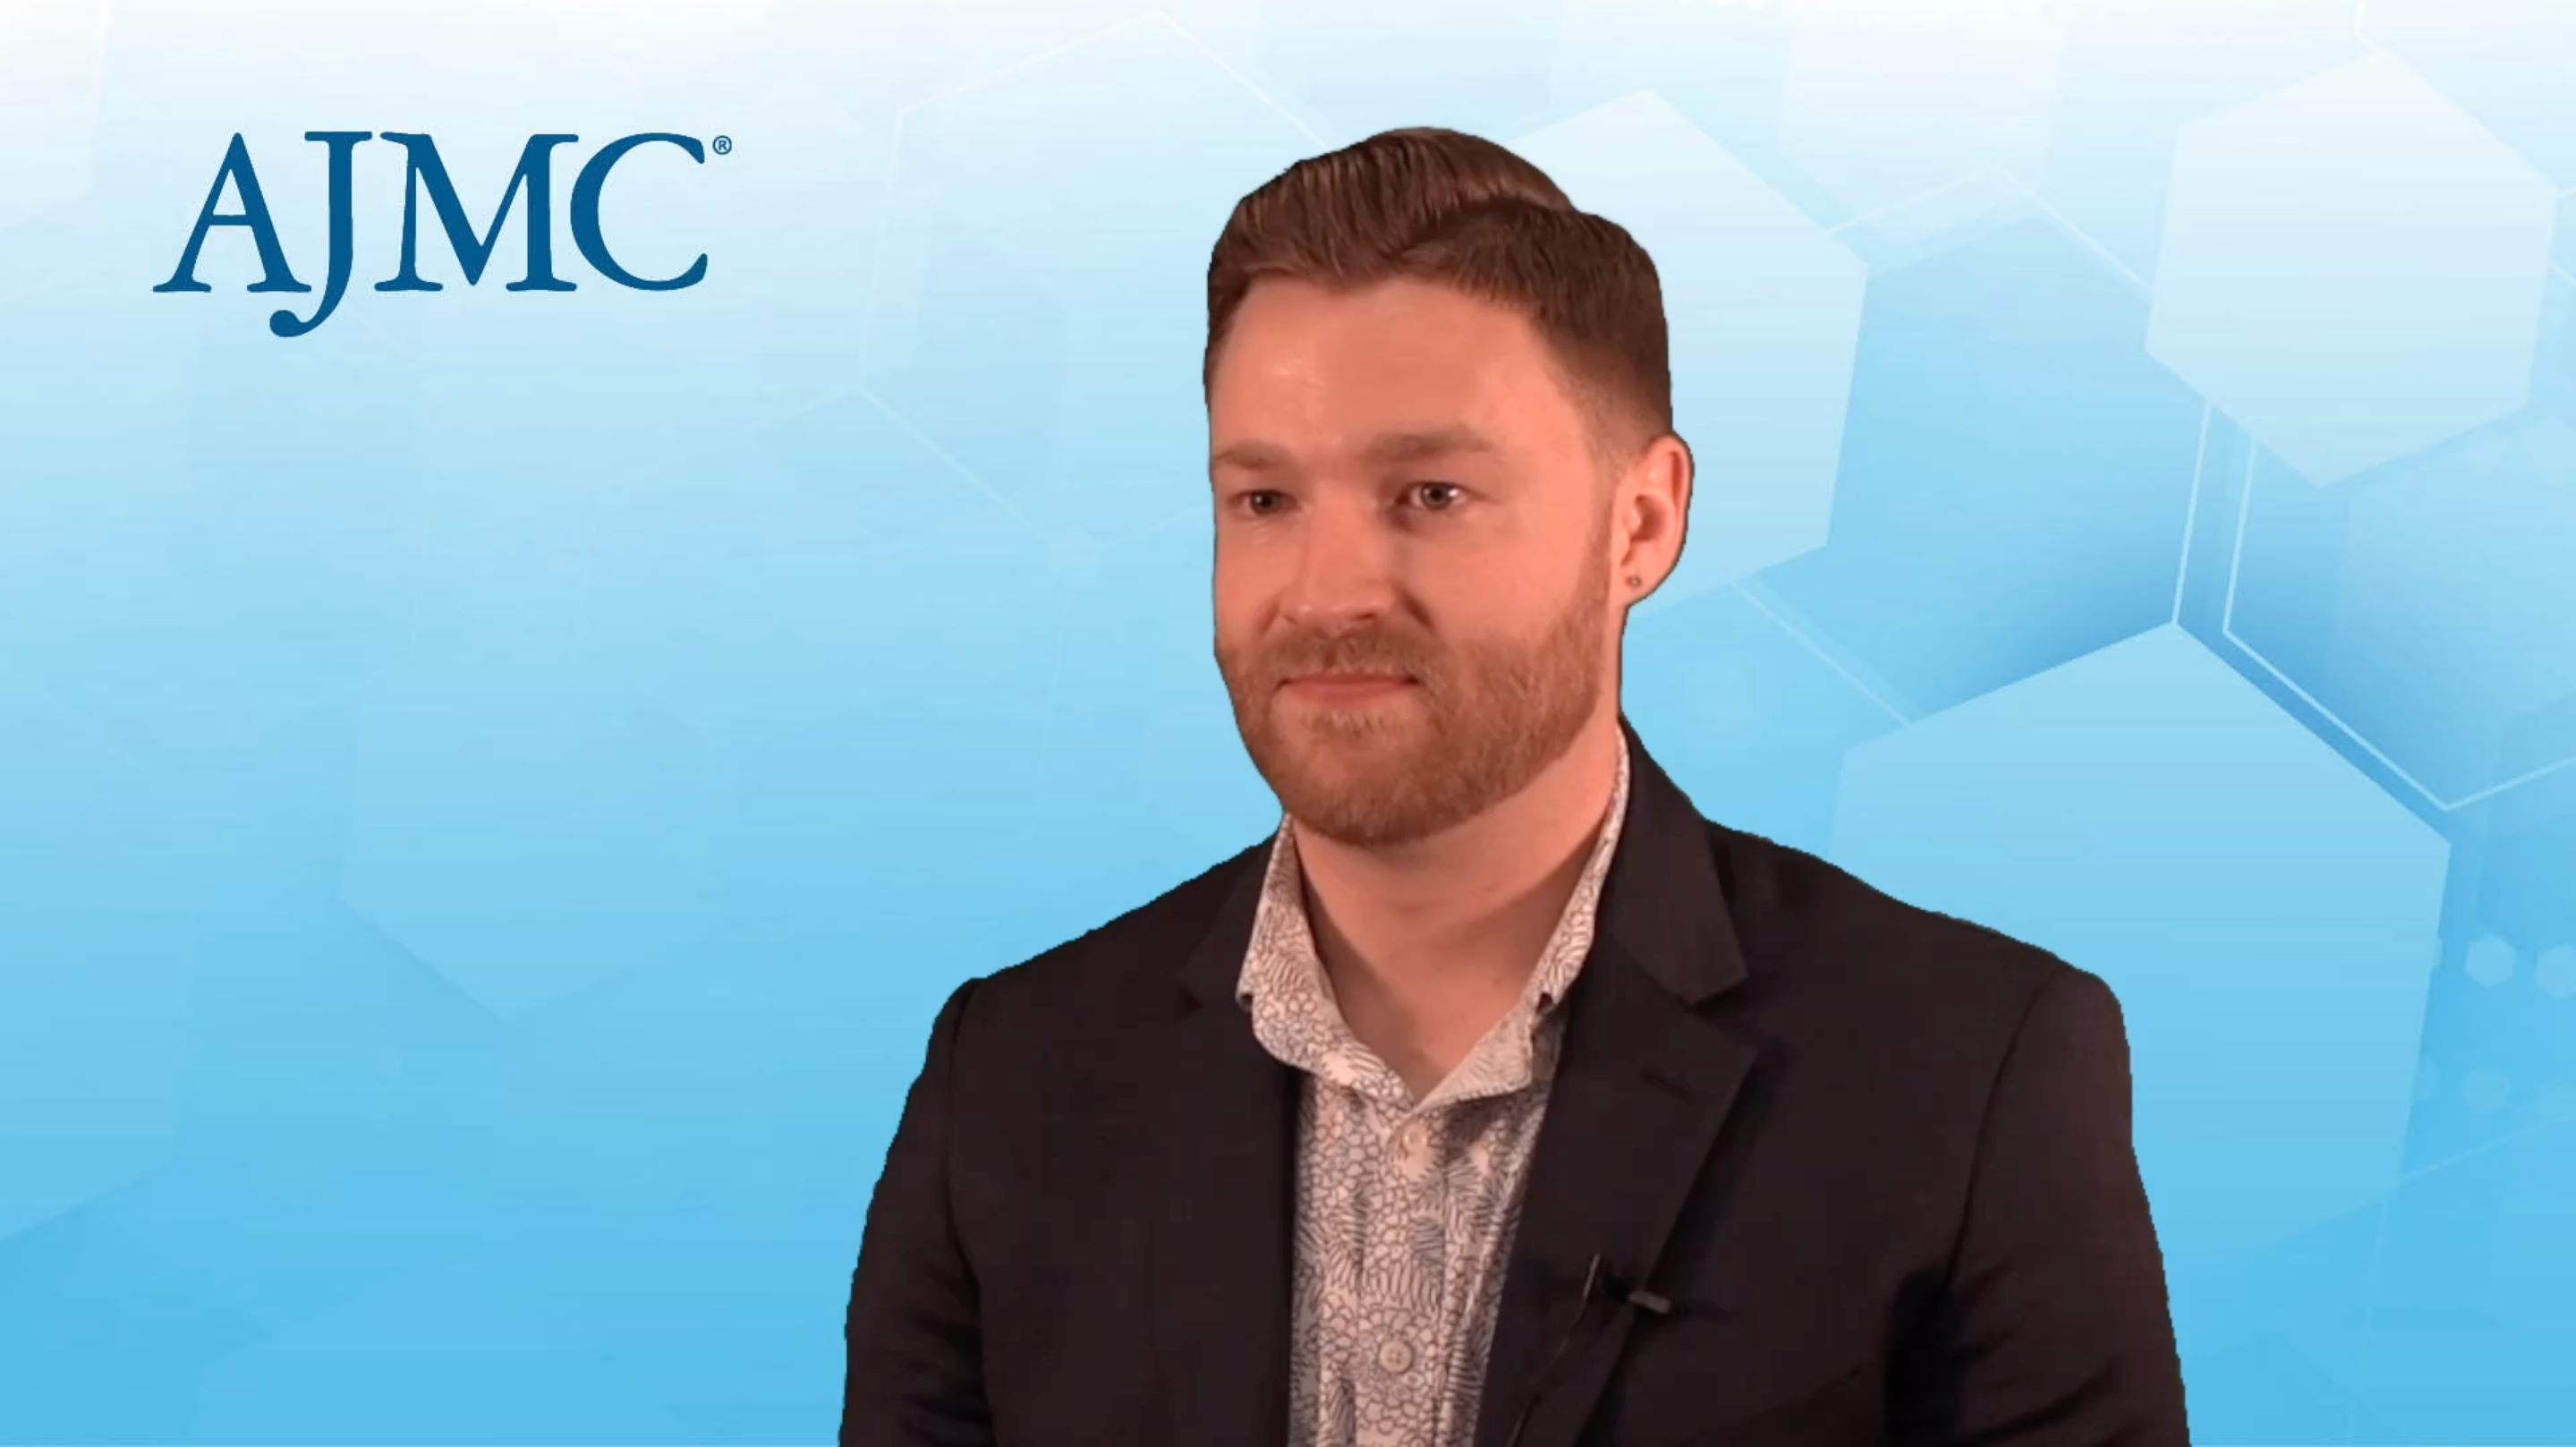 Dr Kevin Astle on the Pharmacist's Role in PrEP Accessibility, Adherence